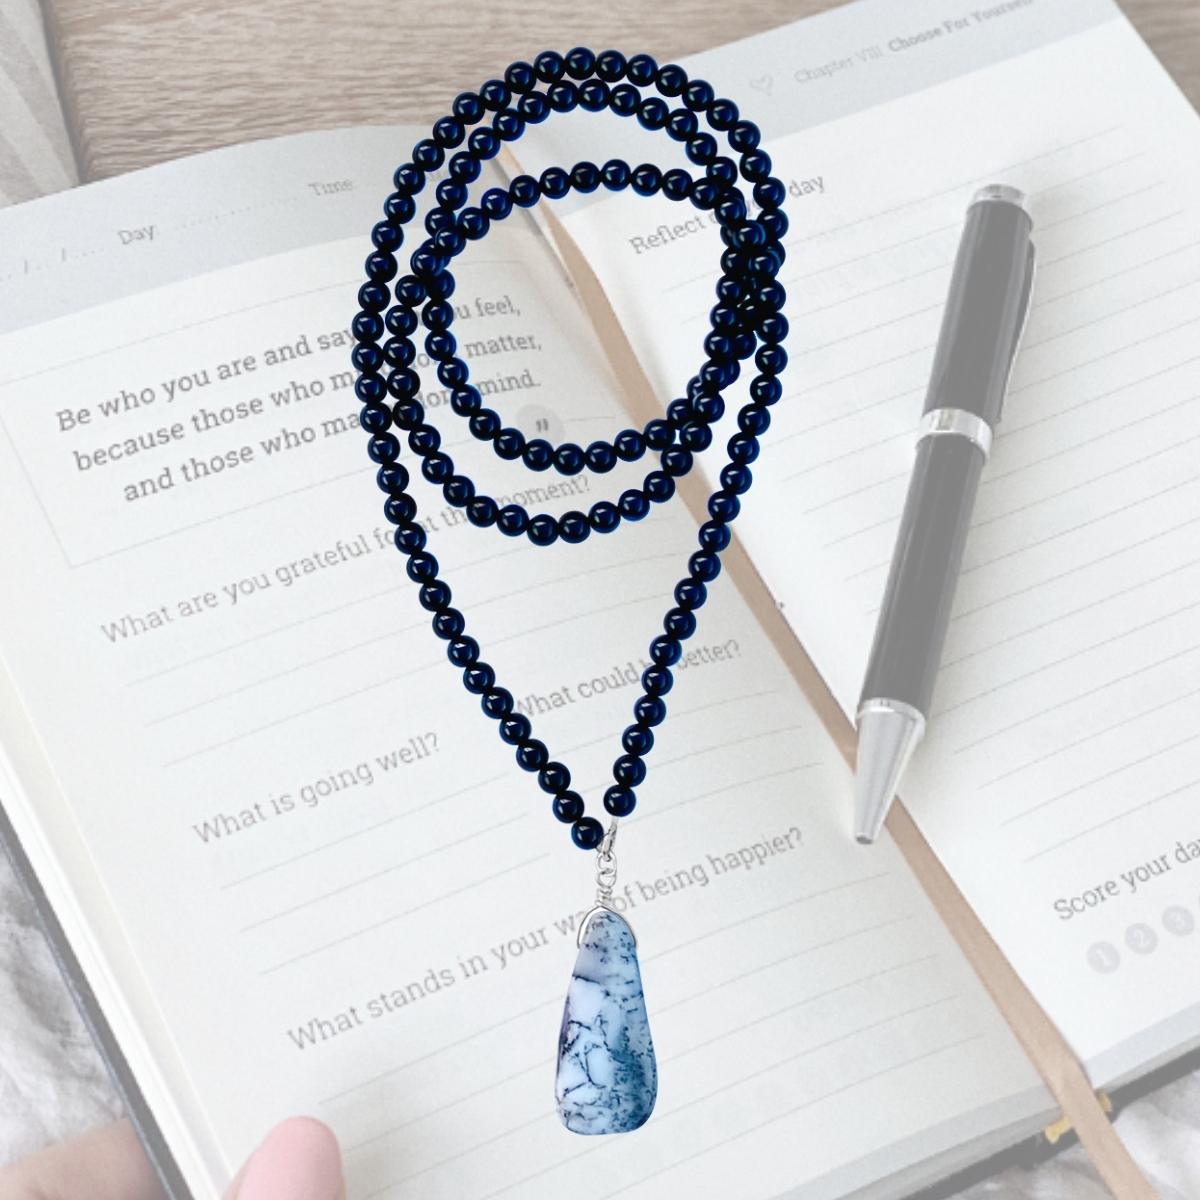 Journal now with the #1 best-selling guided journal and experience a breakthrough in relationships, your mental well-being and an increased sense of togetherness and belonging in the world.  Work on your gratitude journal while wearing the Onyx Necklace for Self Control. Onyx Necklace against Negativity. 